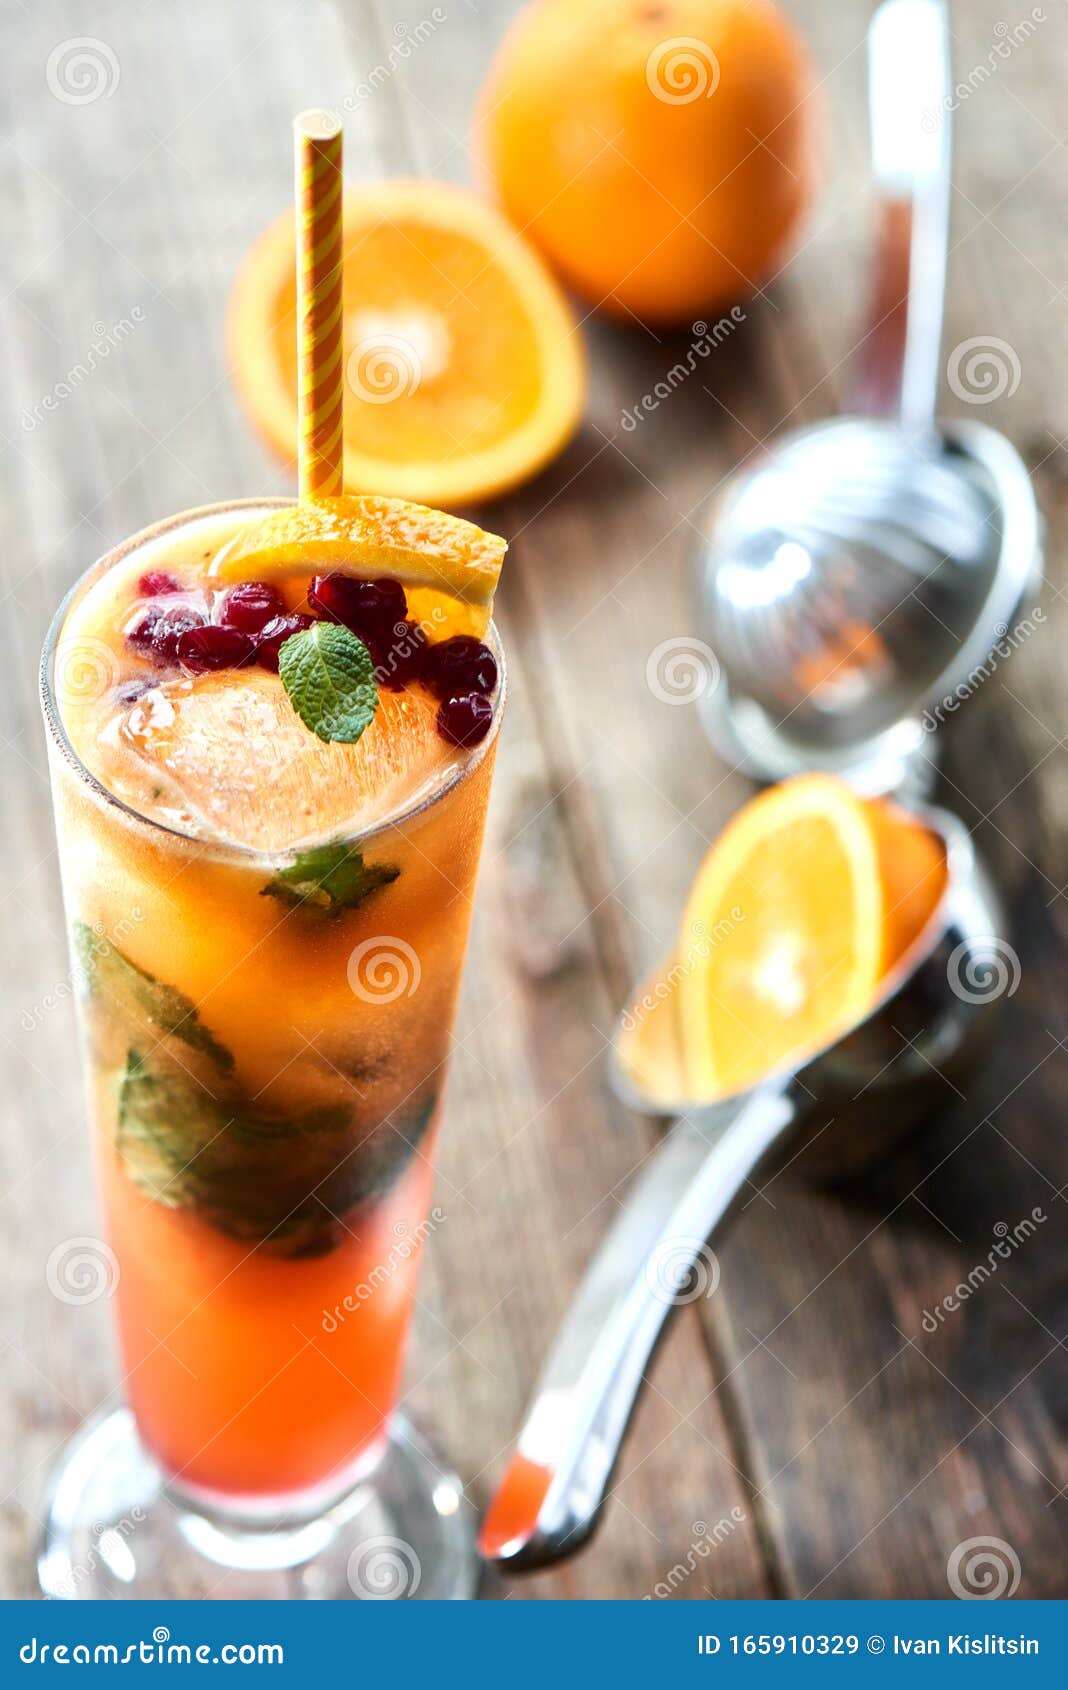 The Glass of Alcoholic Cocktail Sex on the Beach Homemade Cranberry, Mint, Orange and Peach Juice on a Wooden Table Closeup Stock Image